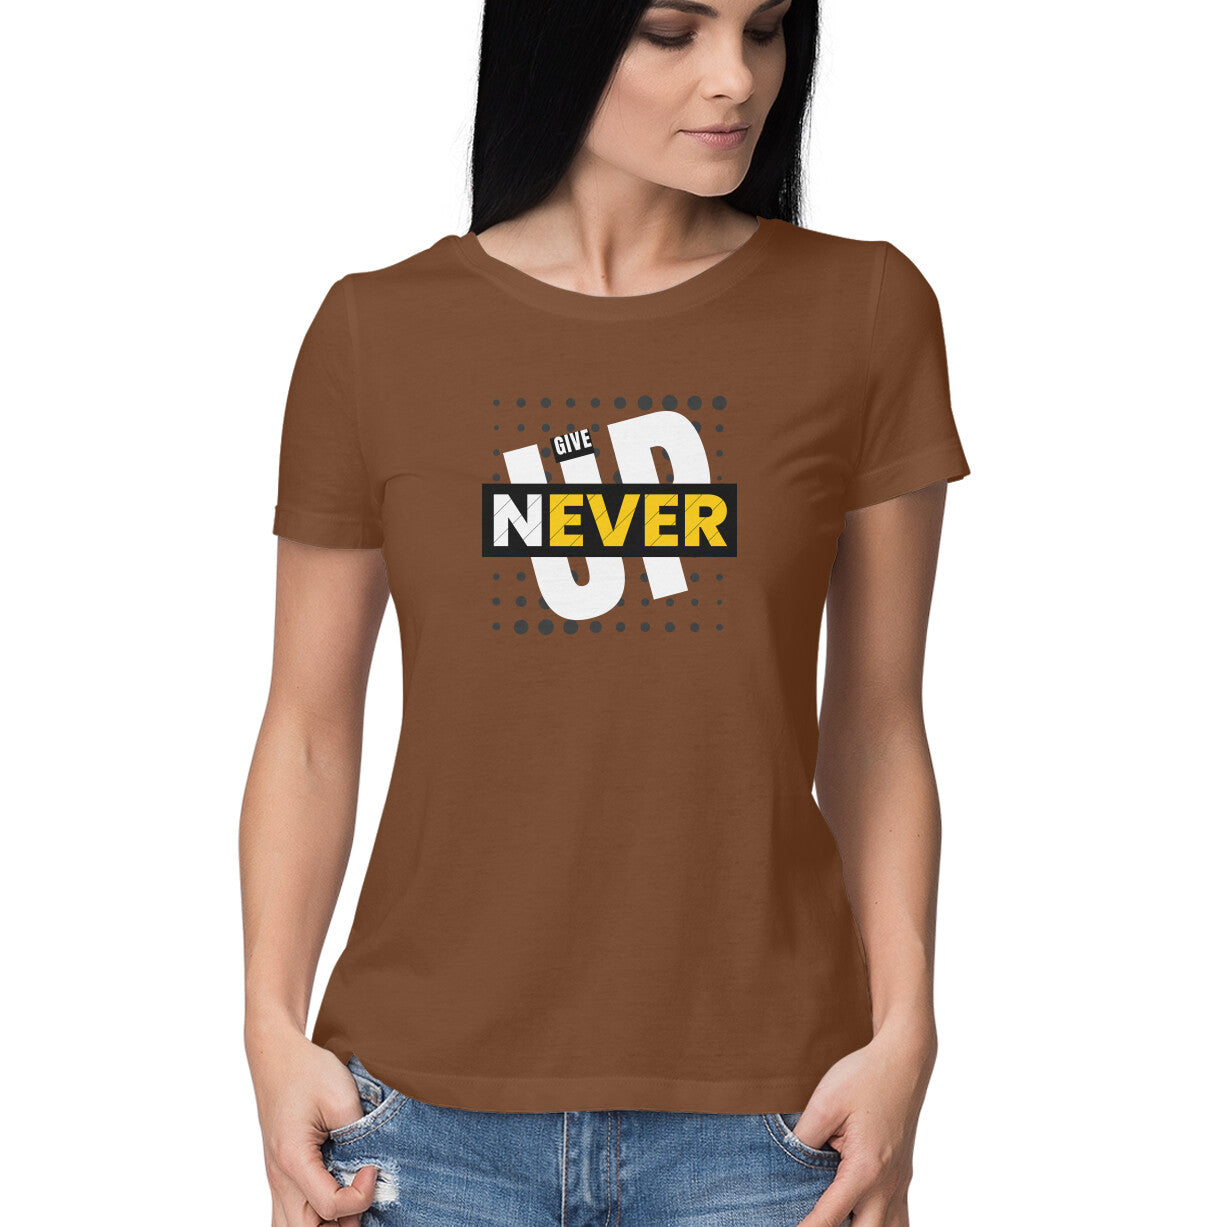 Never Give Up - Women's Coffee Brown Tshirt